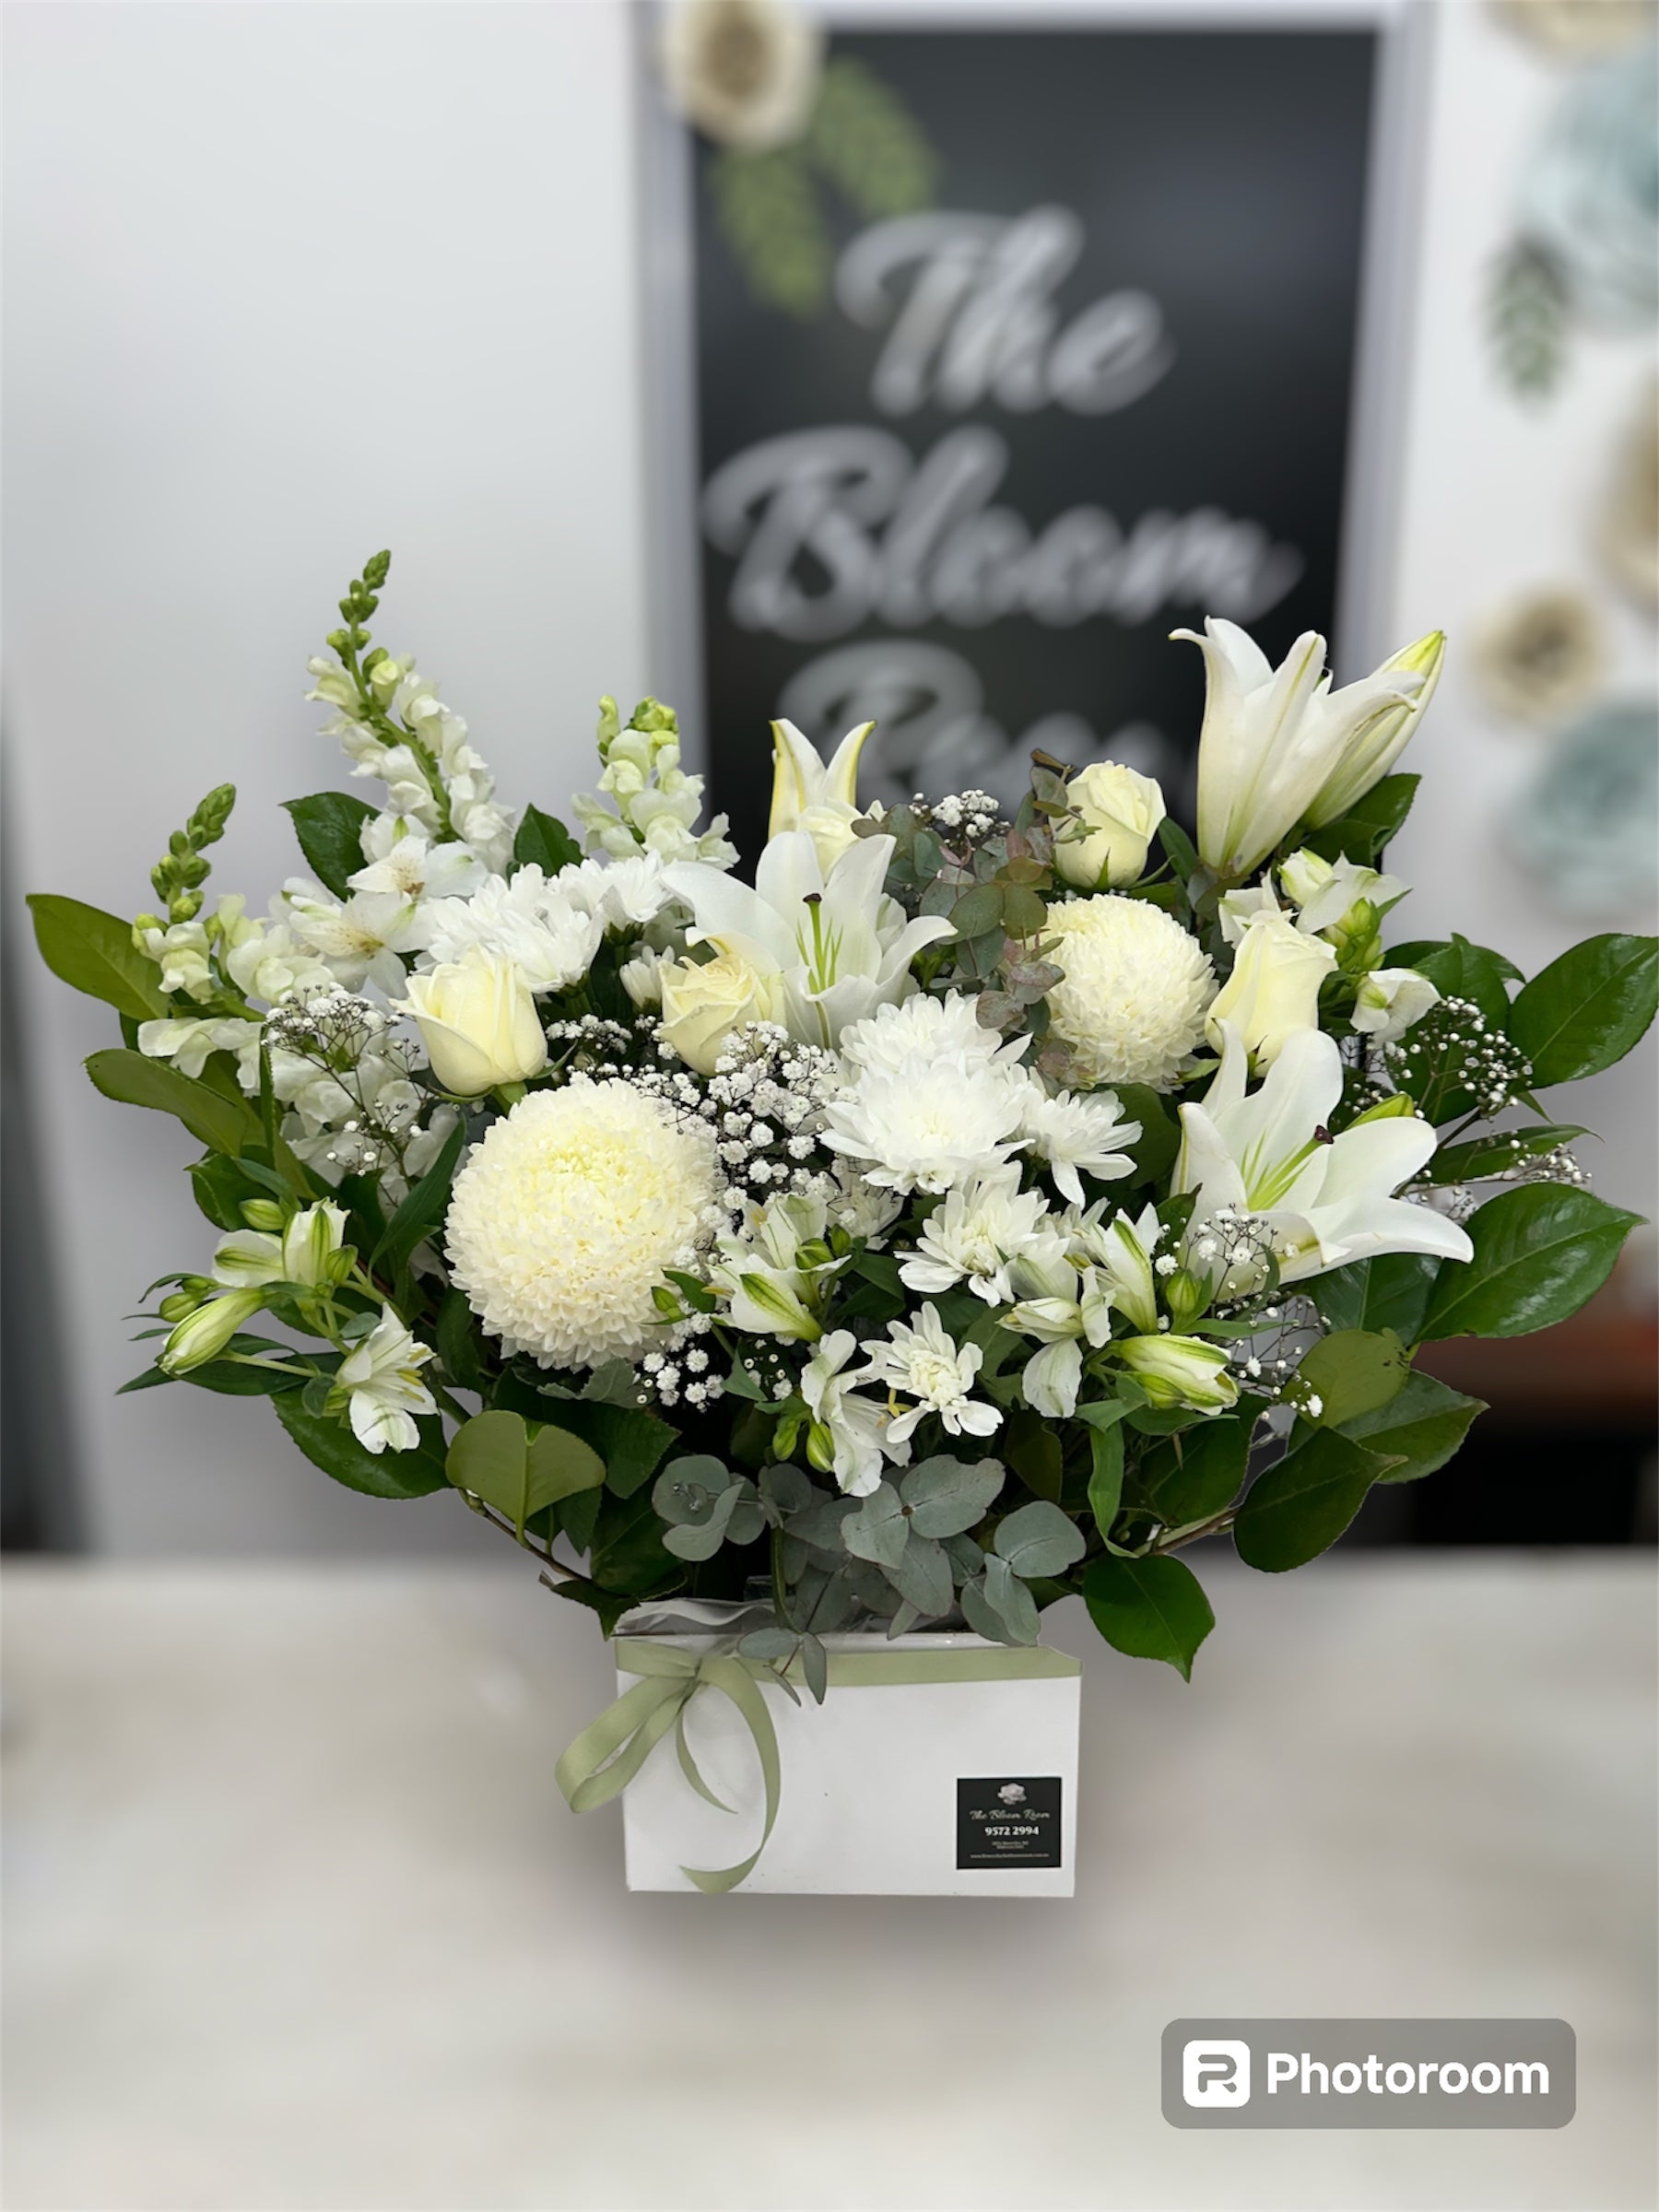 Dreaming of White Blooms - The Bloom Room 